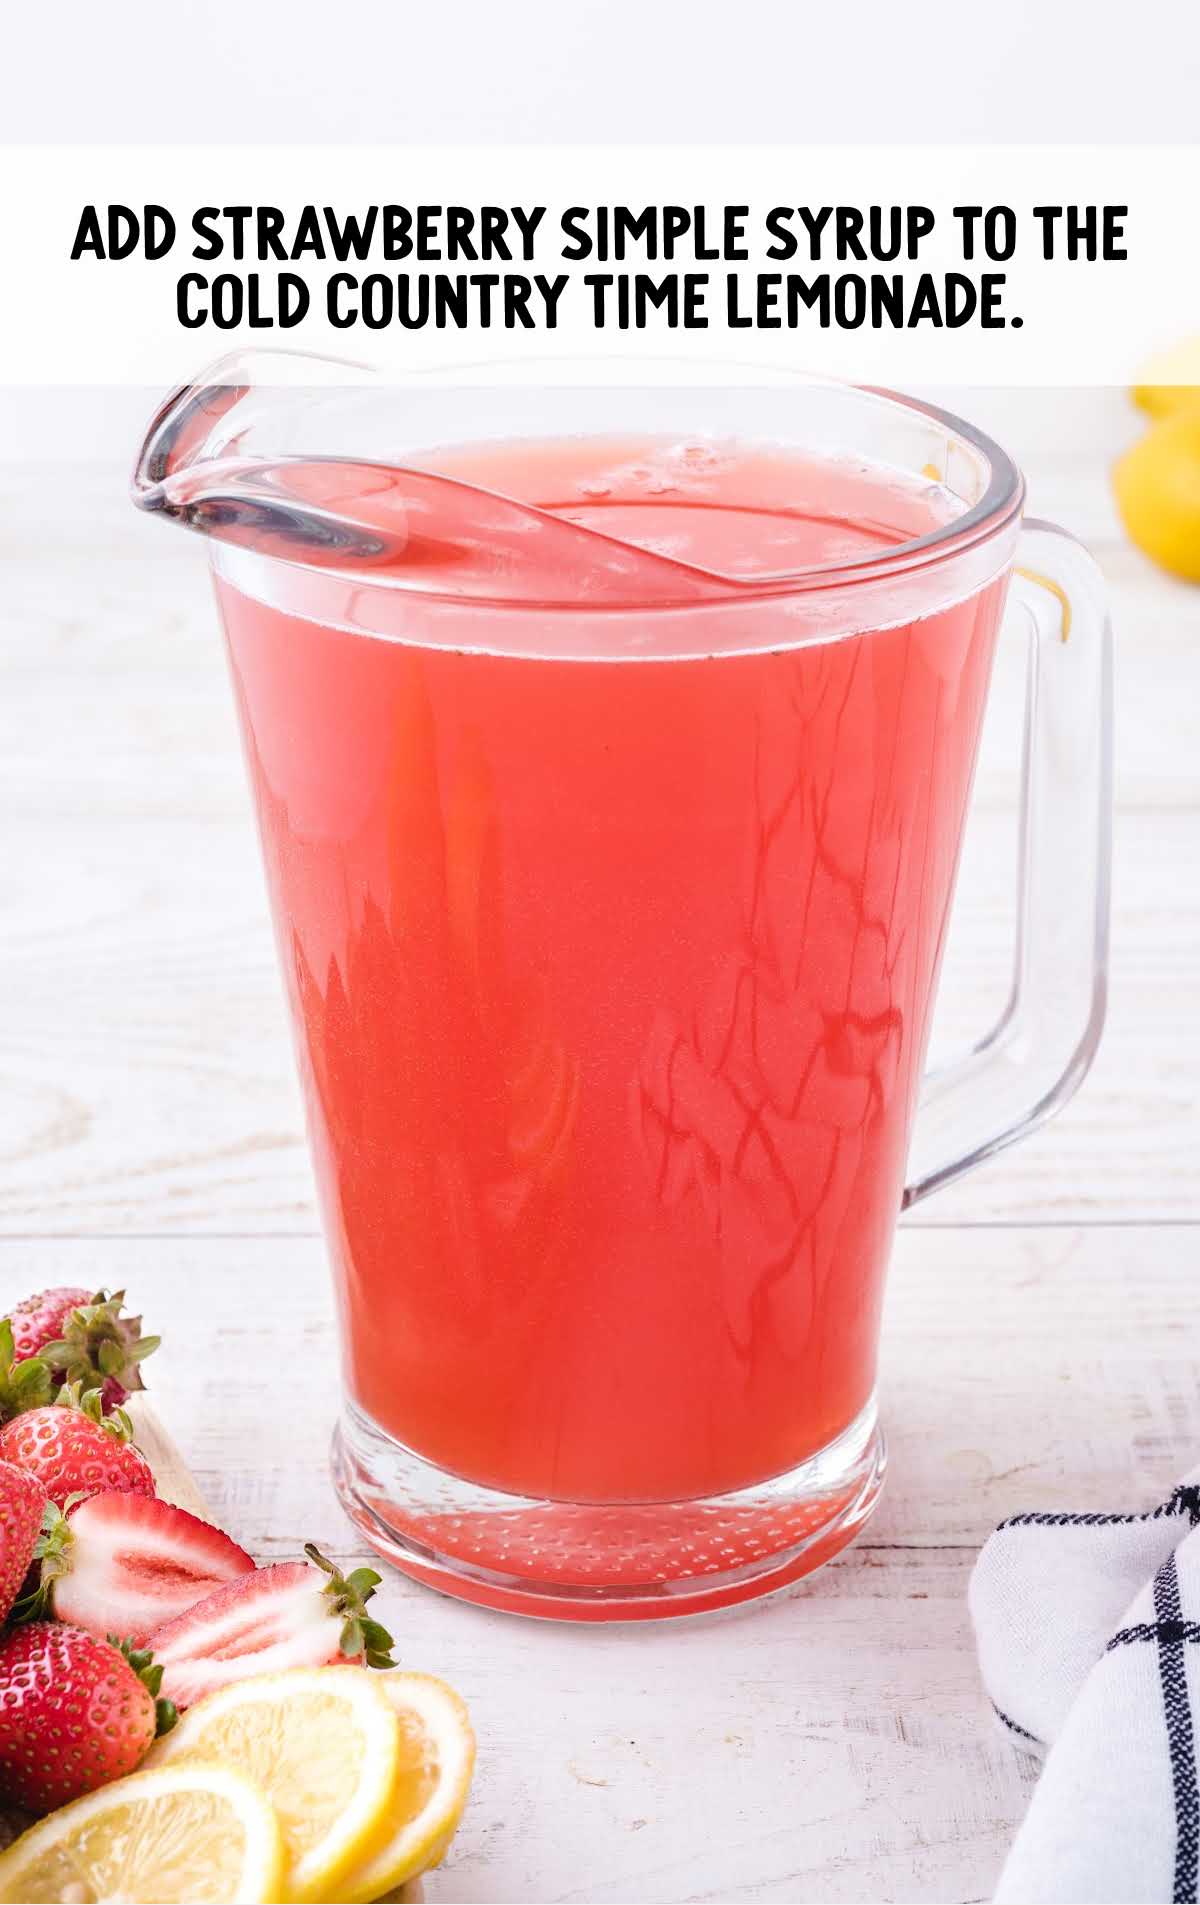 strawberry simple syrup added to the pitcher of lemonade